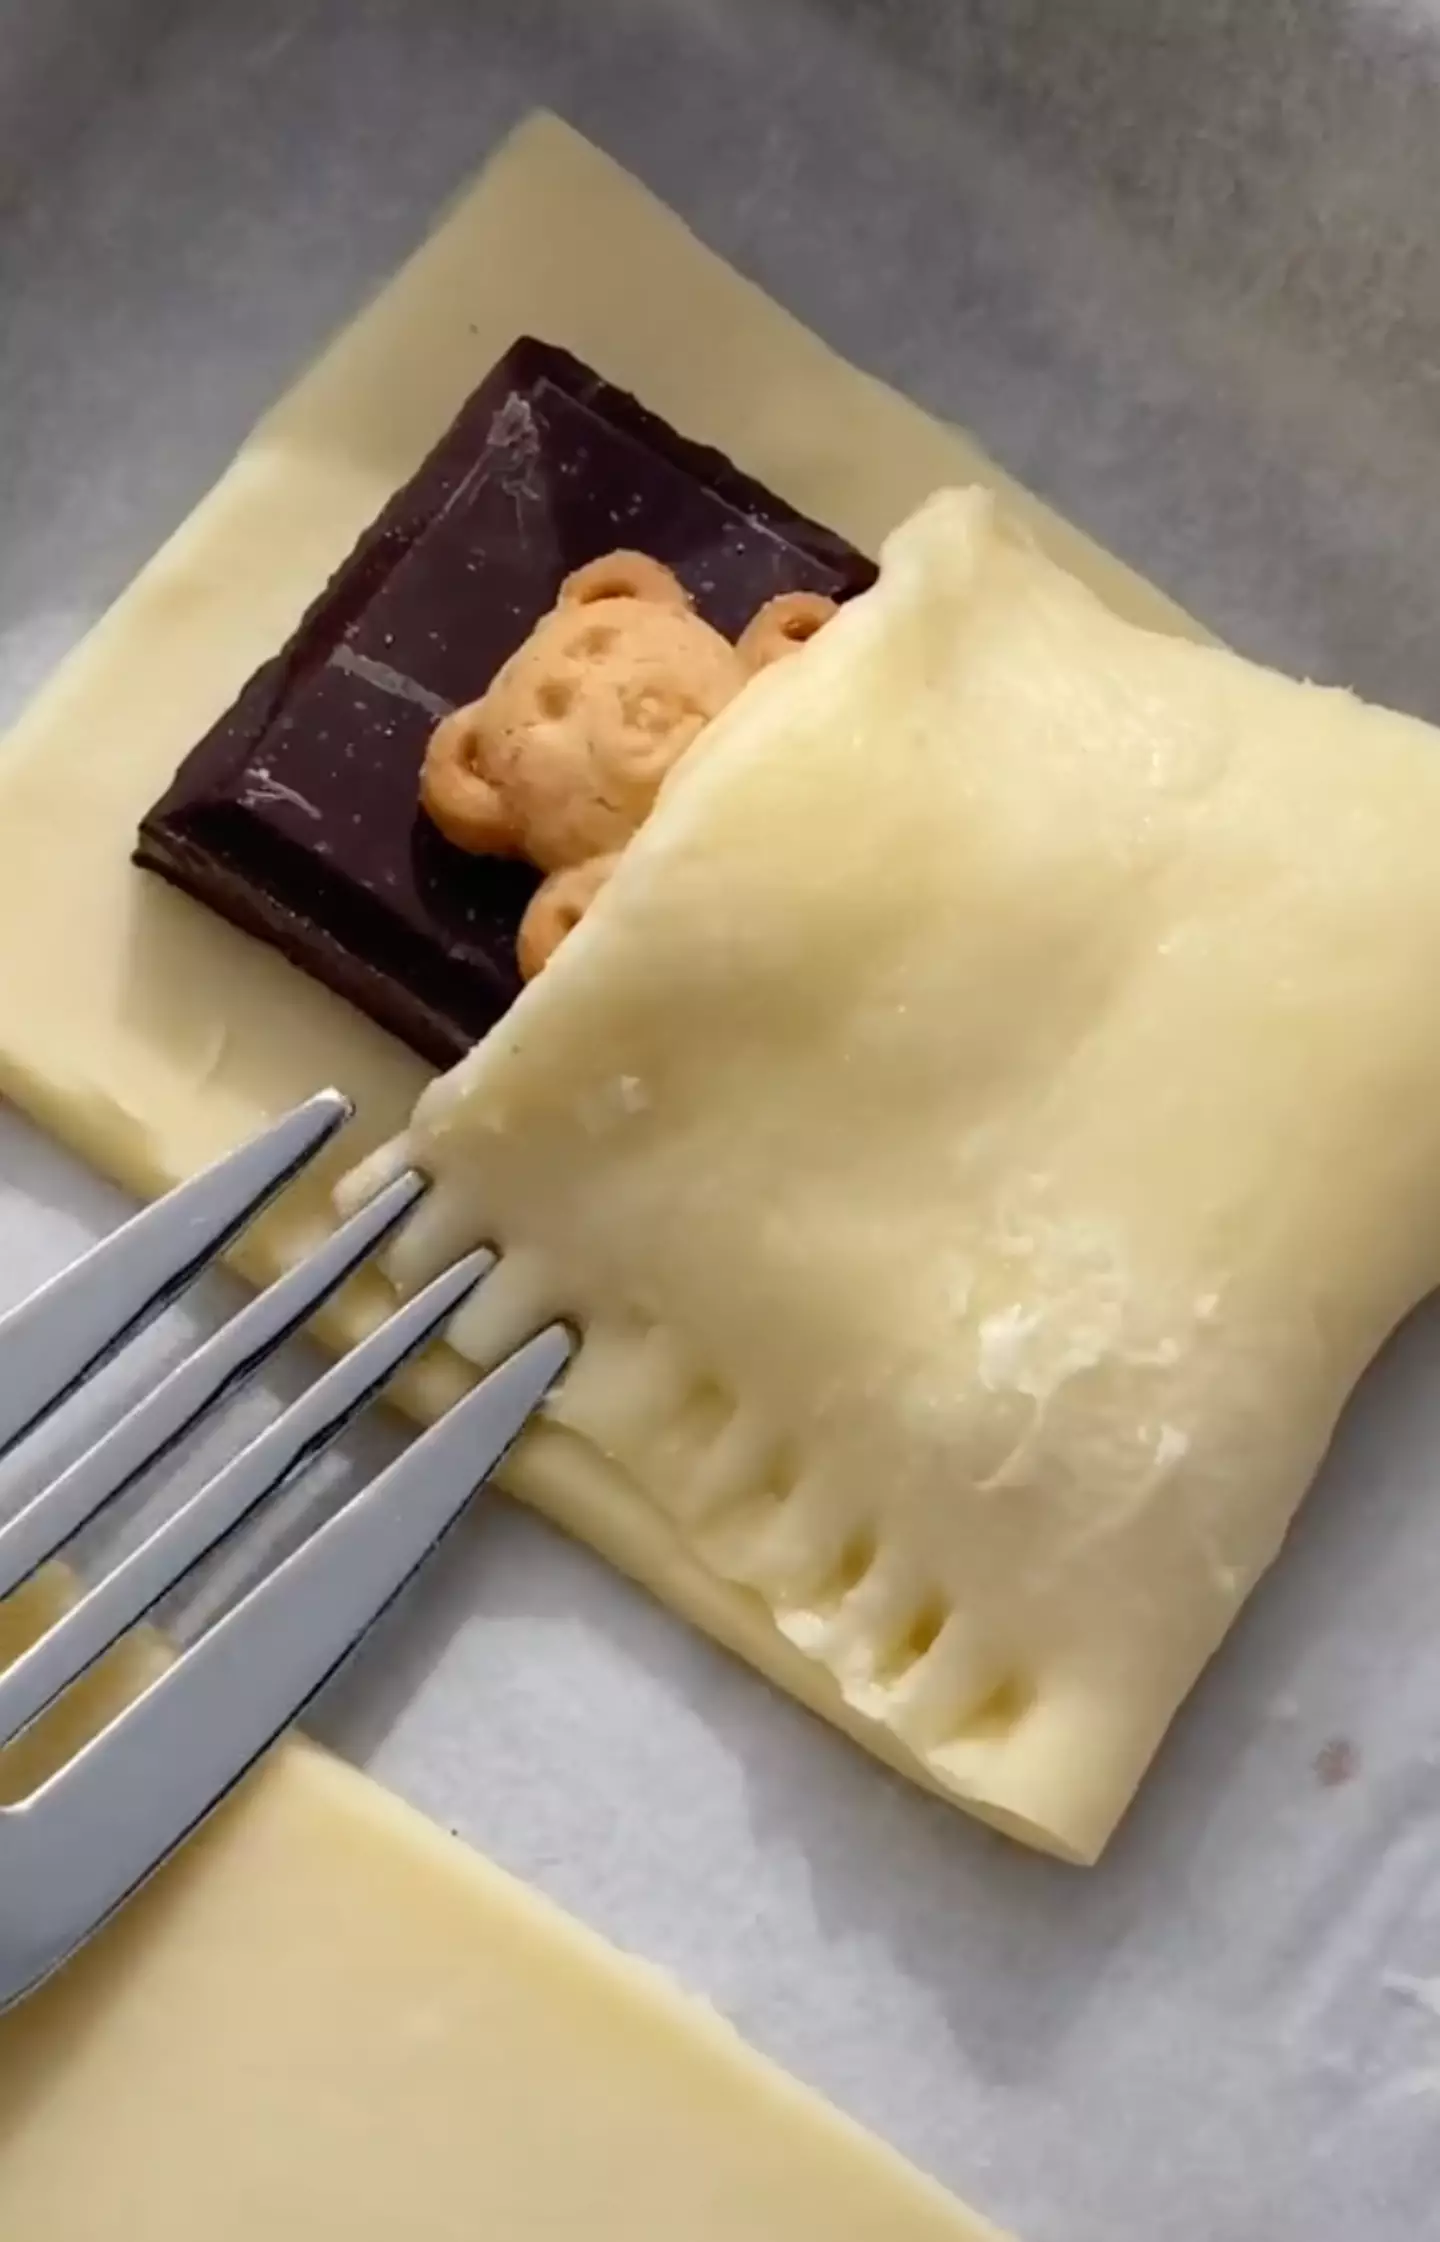 Tuck in your teddy bear biscuits in by pressing a fork into your pastry. (